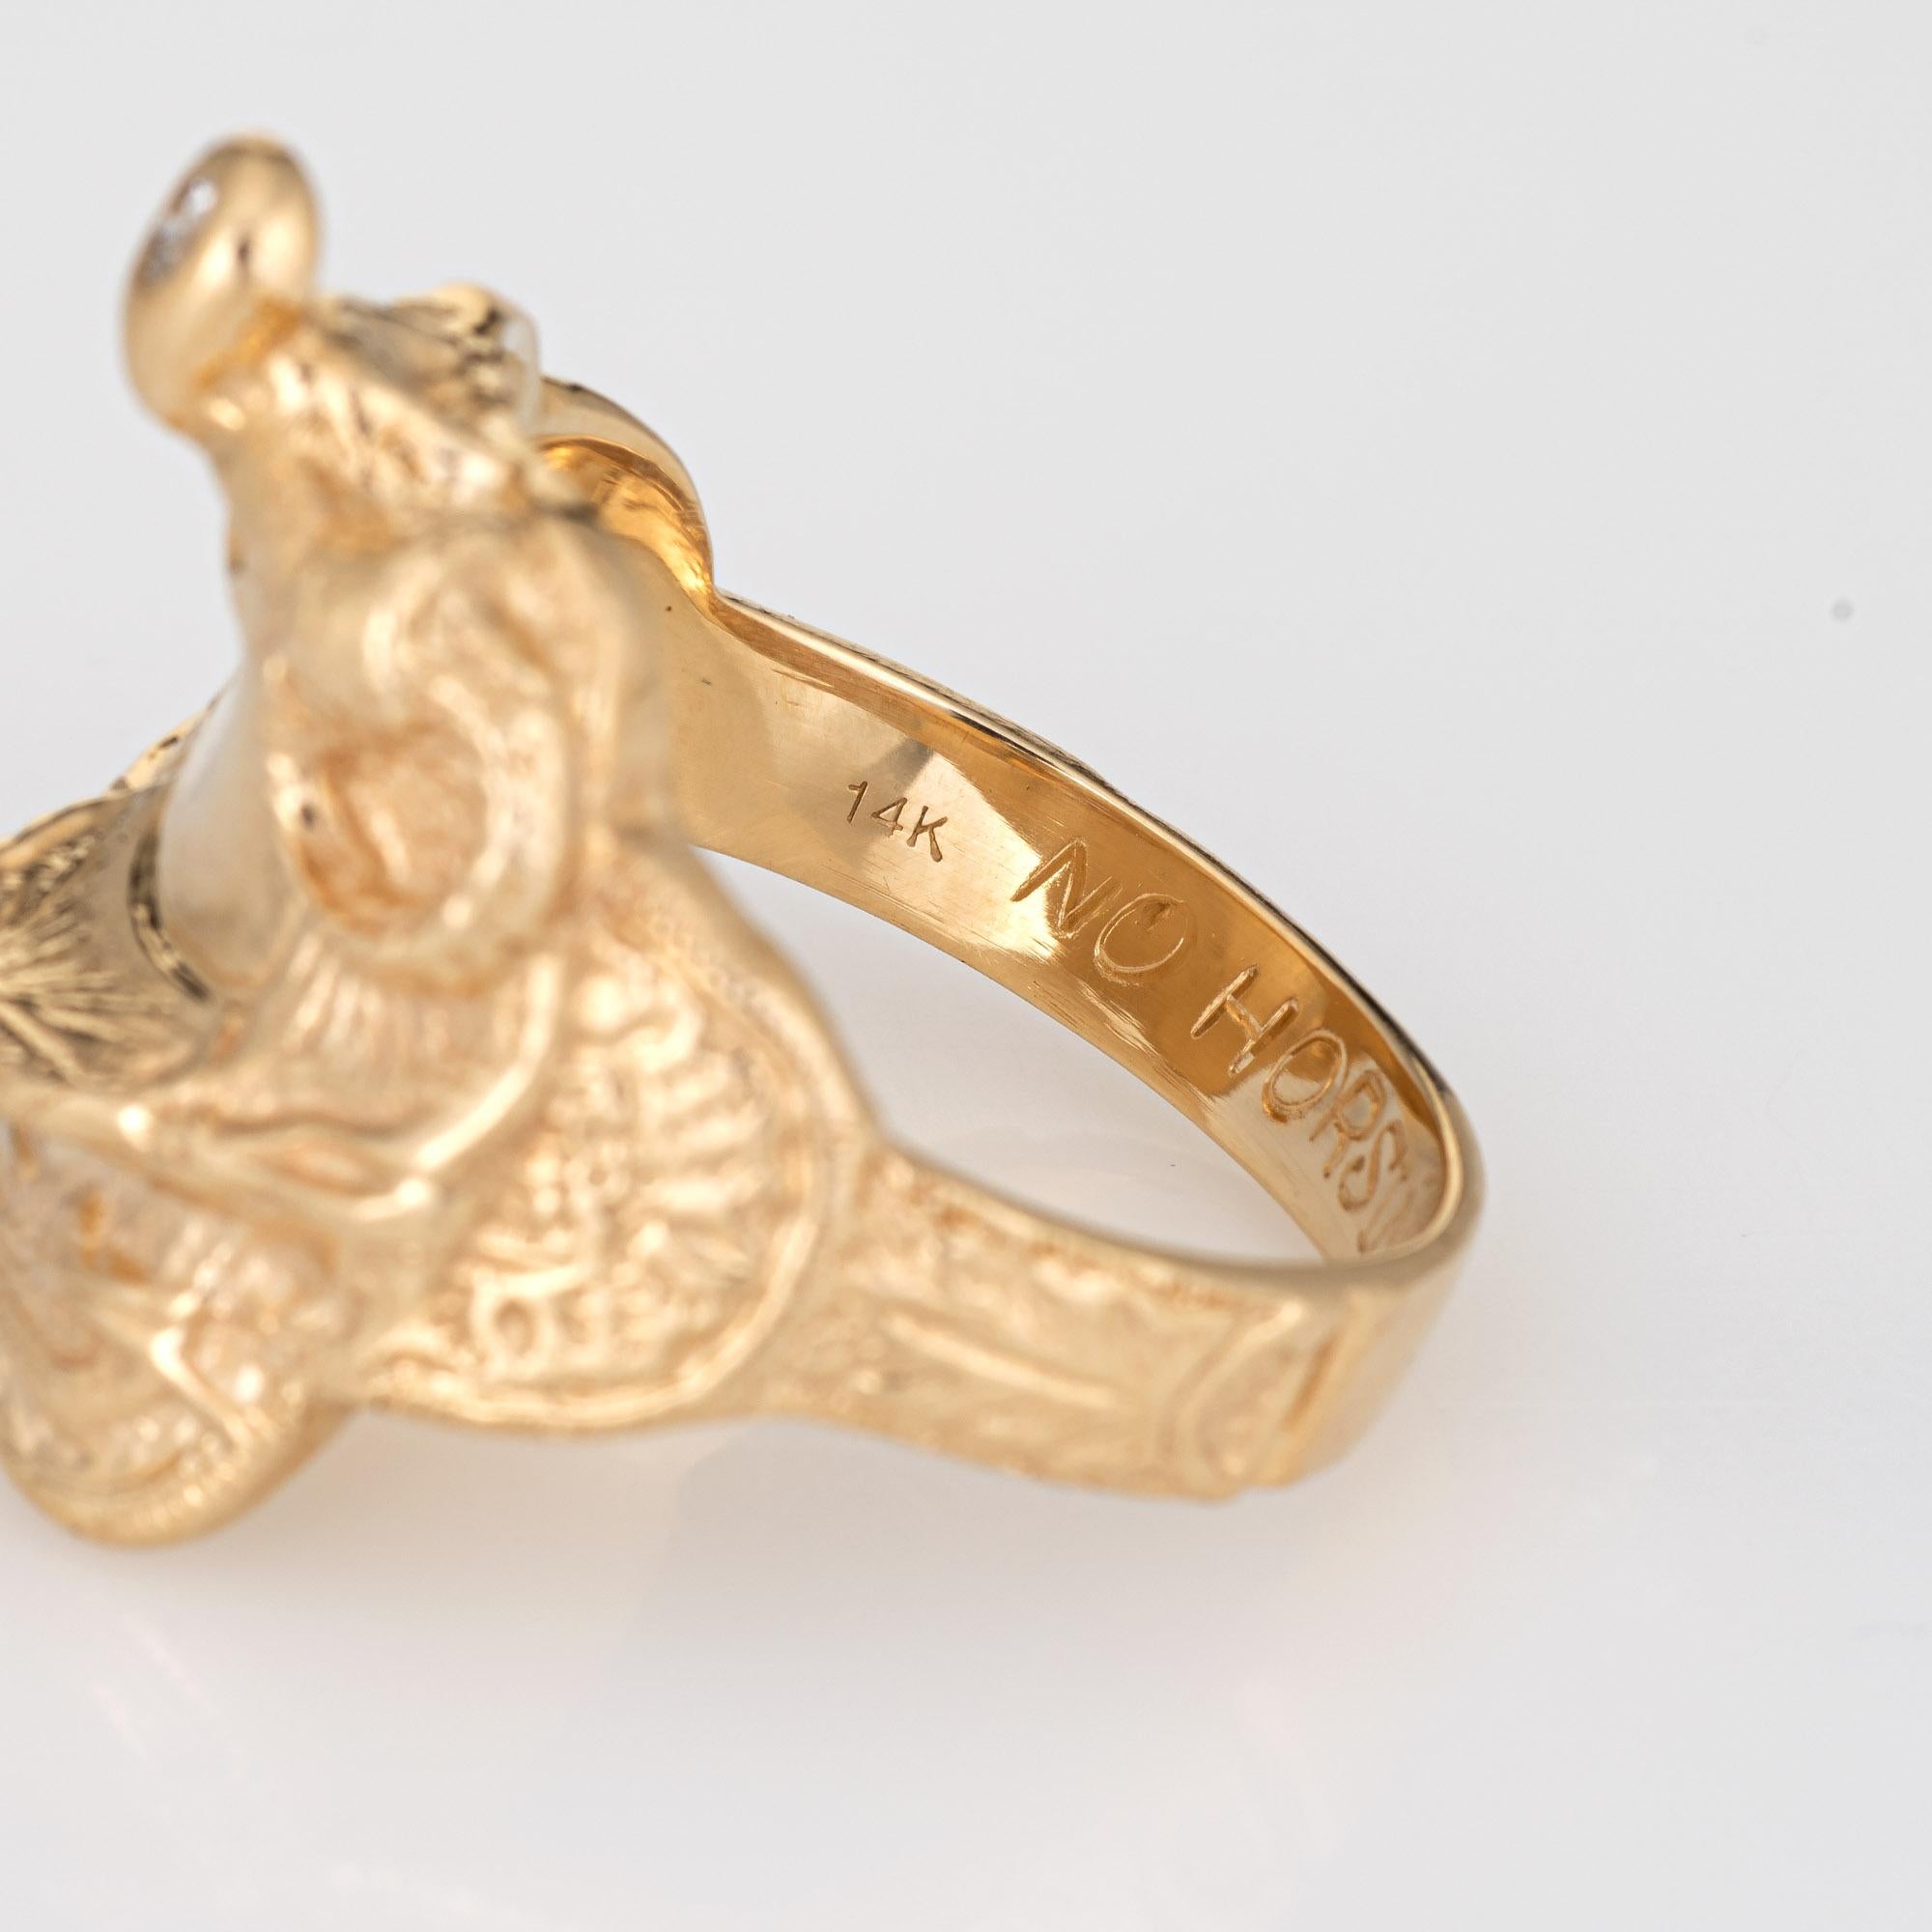 Women's or Men's Vintage Saddle Ring Diamond 14k Yellow Gold Horse Equestrian Jewelry